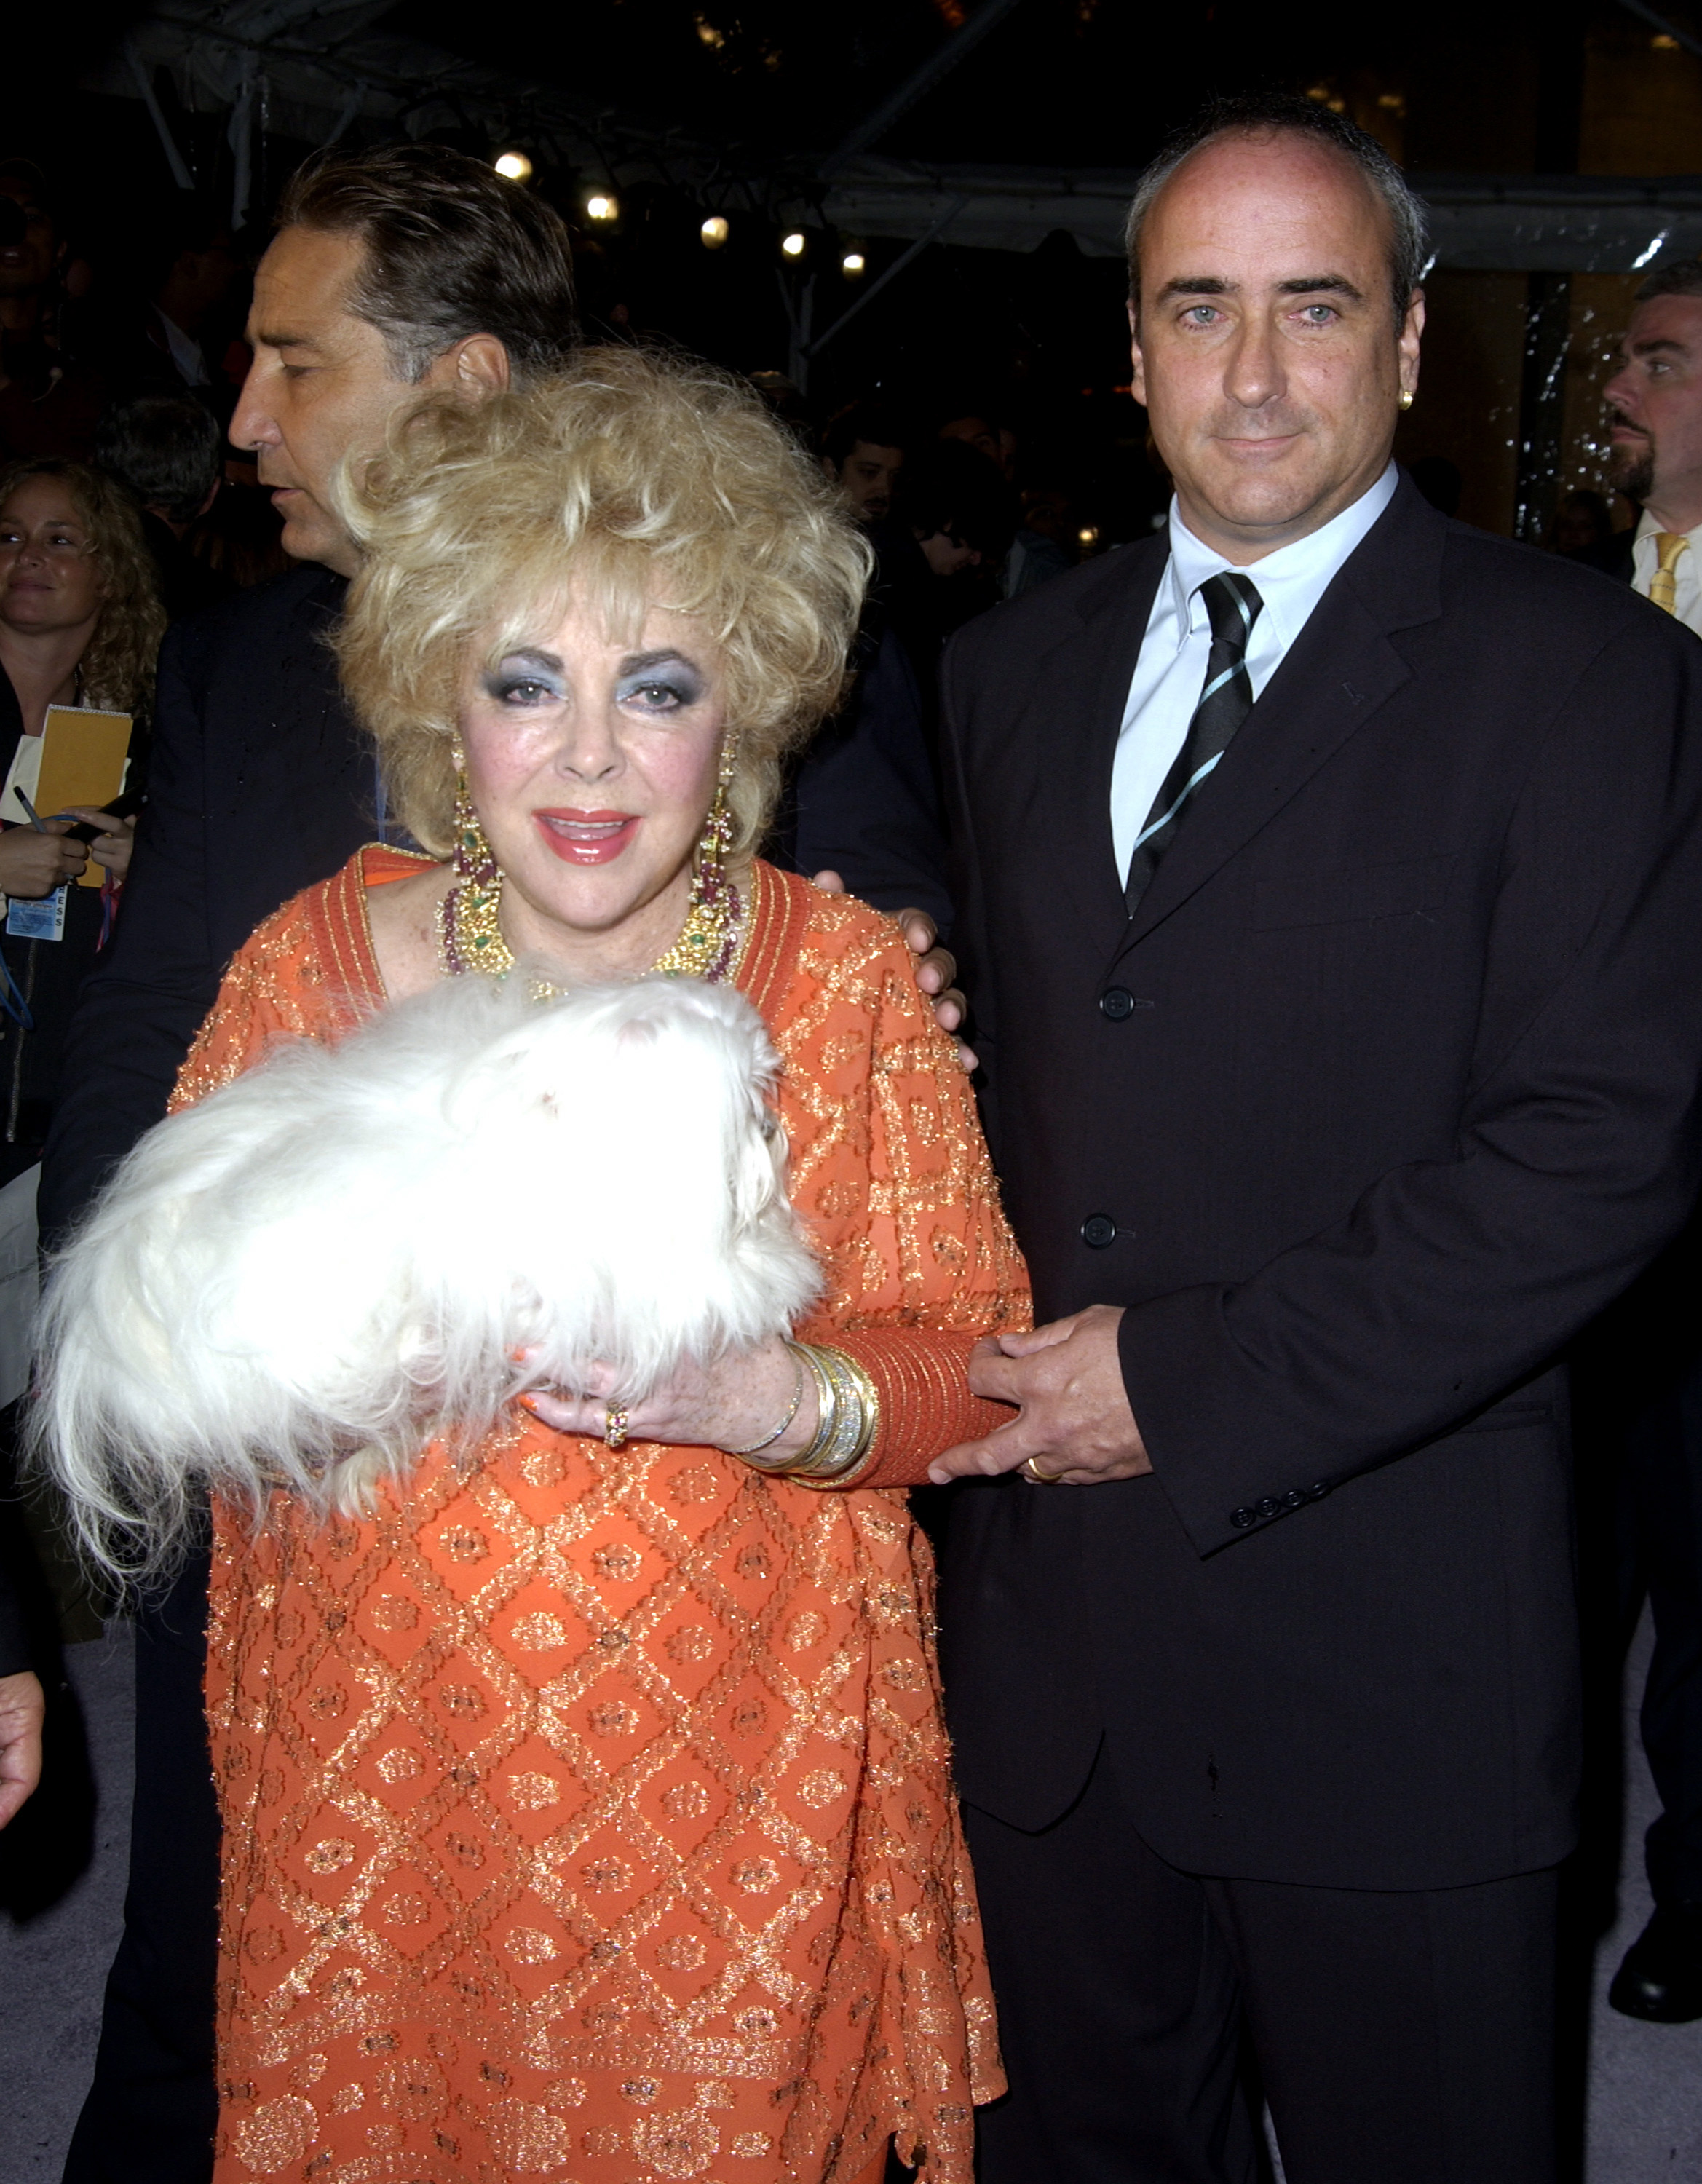 Dame Elizabeth Taylor and son Chris Wilding during InStyle Magazine Gala to Celebrate the Release of "Elizabeth Taylor: My Love Affair with Jewelry" at Christie's in New York City, New York, United States. | Source: Getty Images